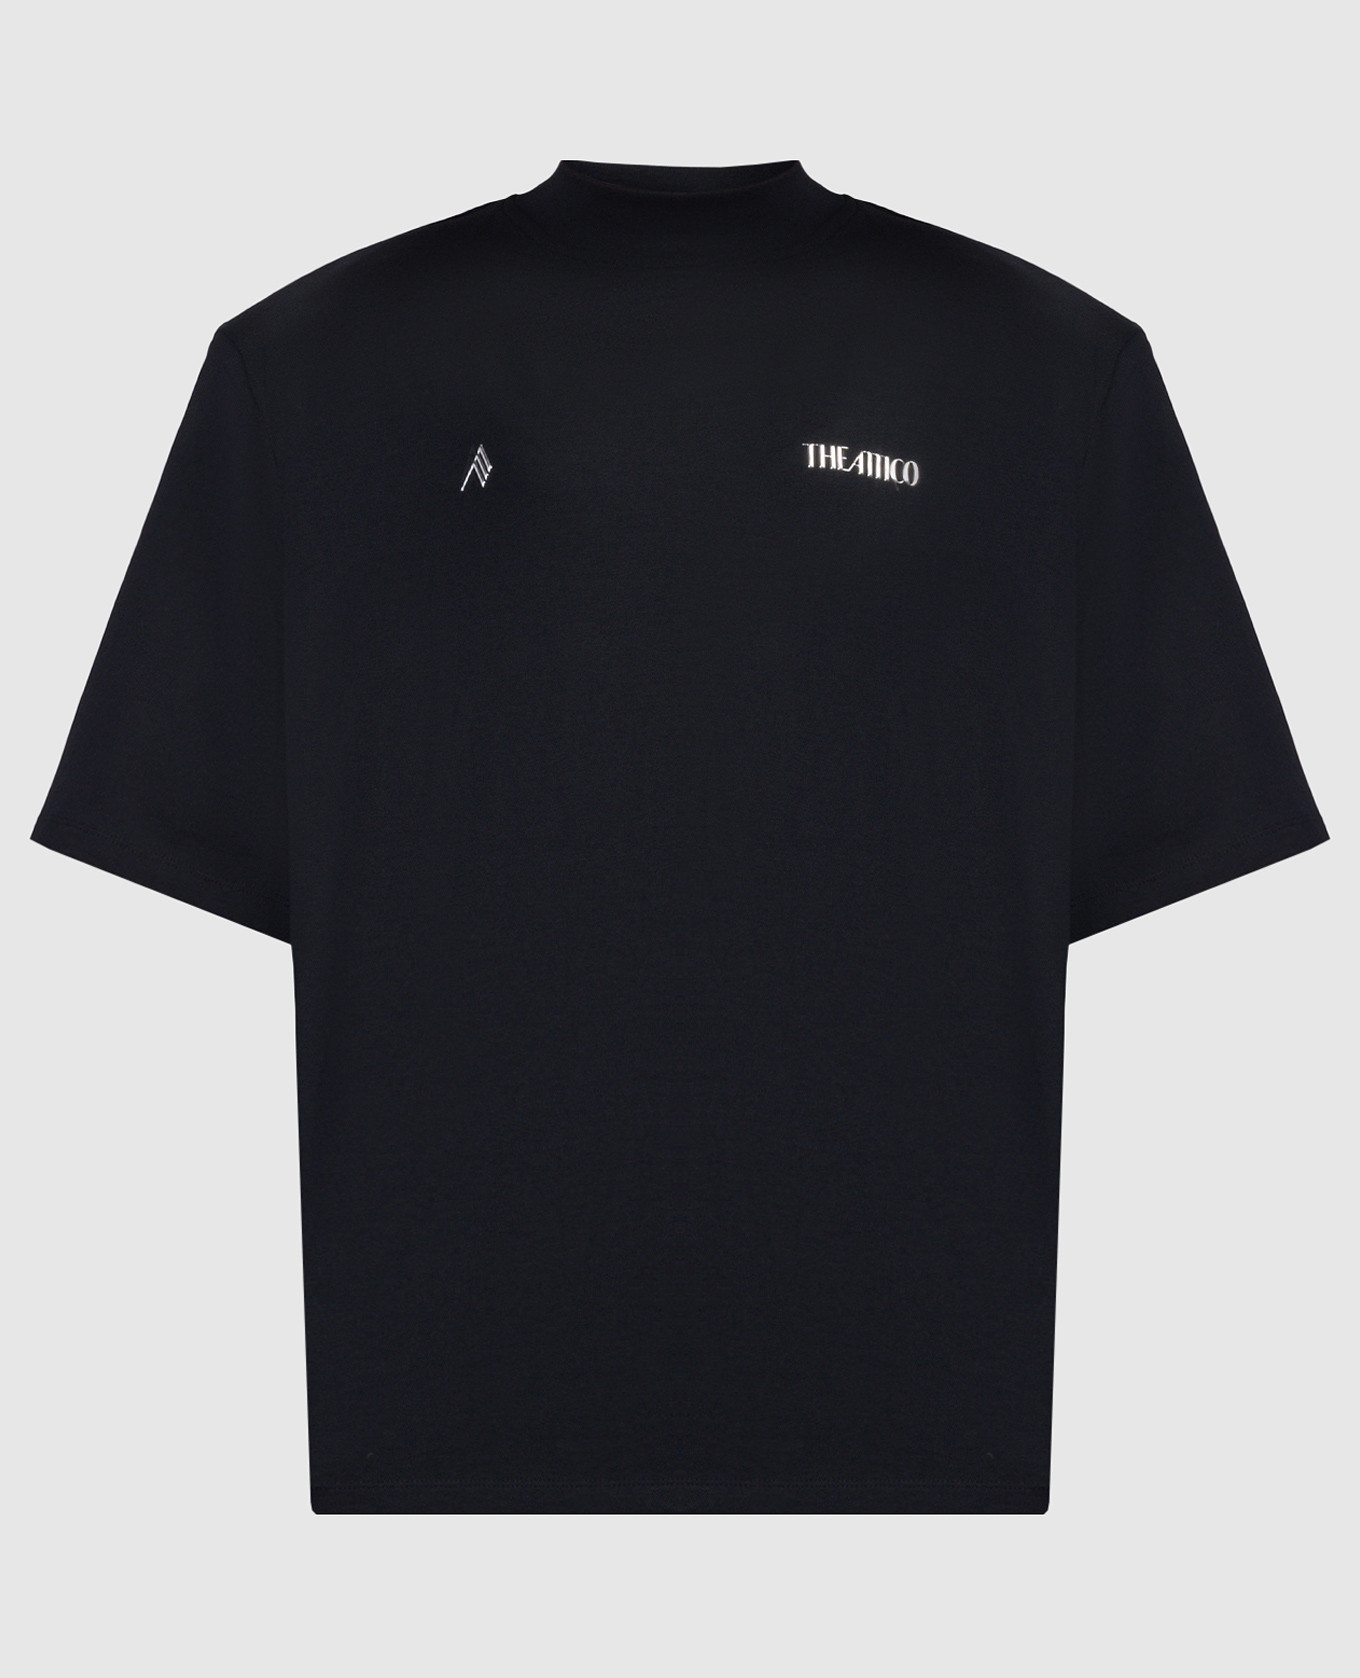 Black T-shirt by Kylie with a textured logo